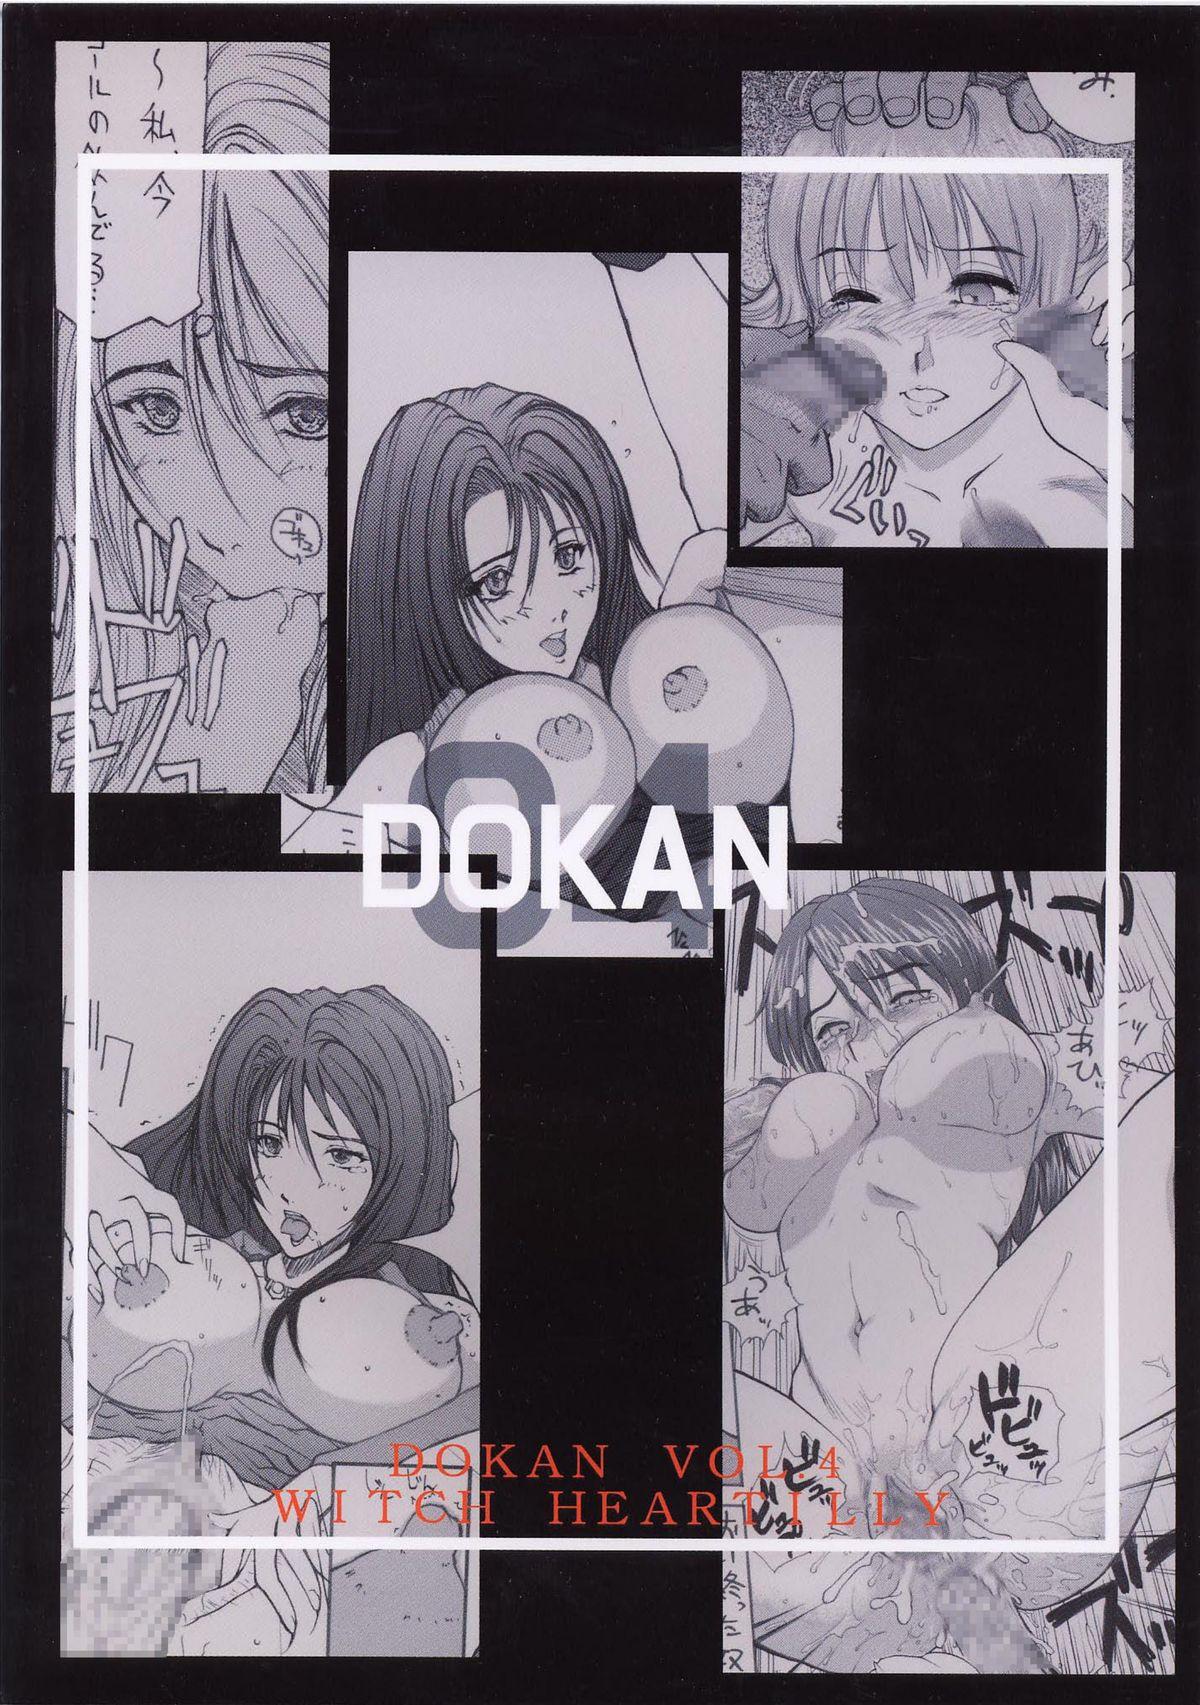 Dokan Vol. 4 WITCH Heartilly 37